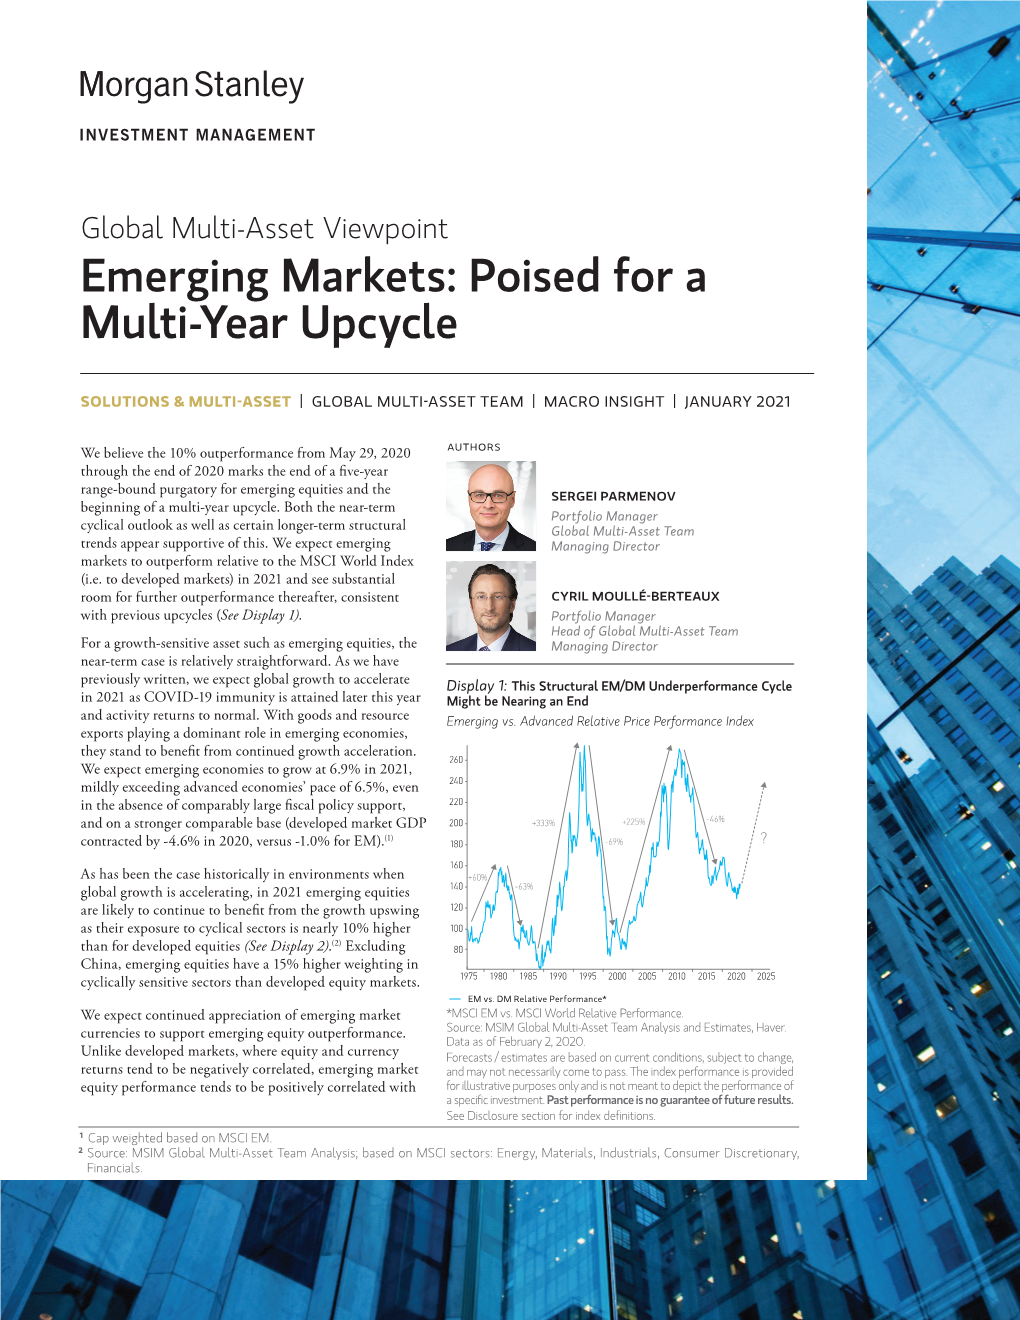 Emerging Markets: Poised for a Multi-Year Upcycle